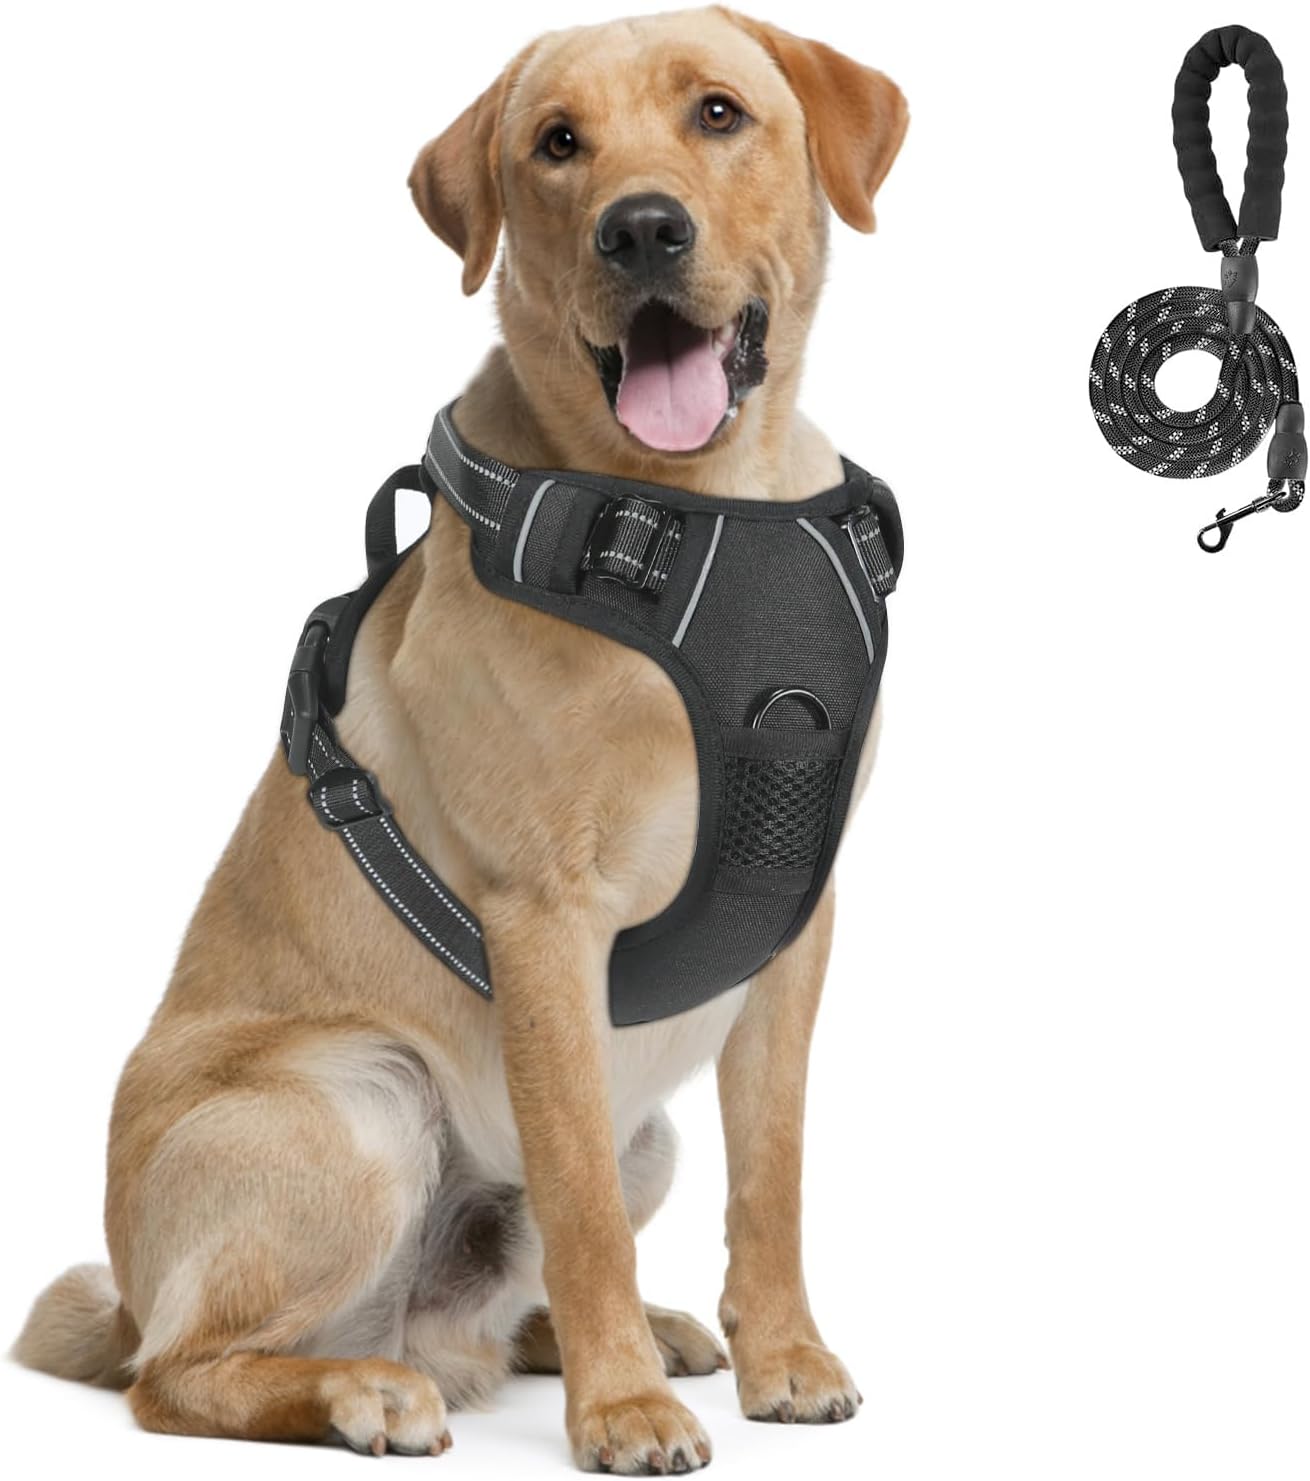 Dog Harness,No-Pull Pet Harness,Adjustable Soft Padded Pet Vest,Highly Reflective Strips and Control Handle for Small Medium Large Dog (Black, Large)